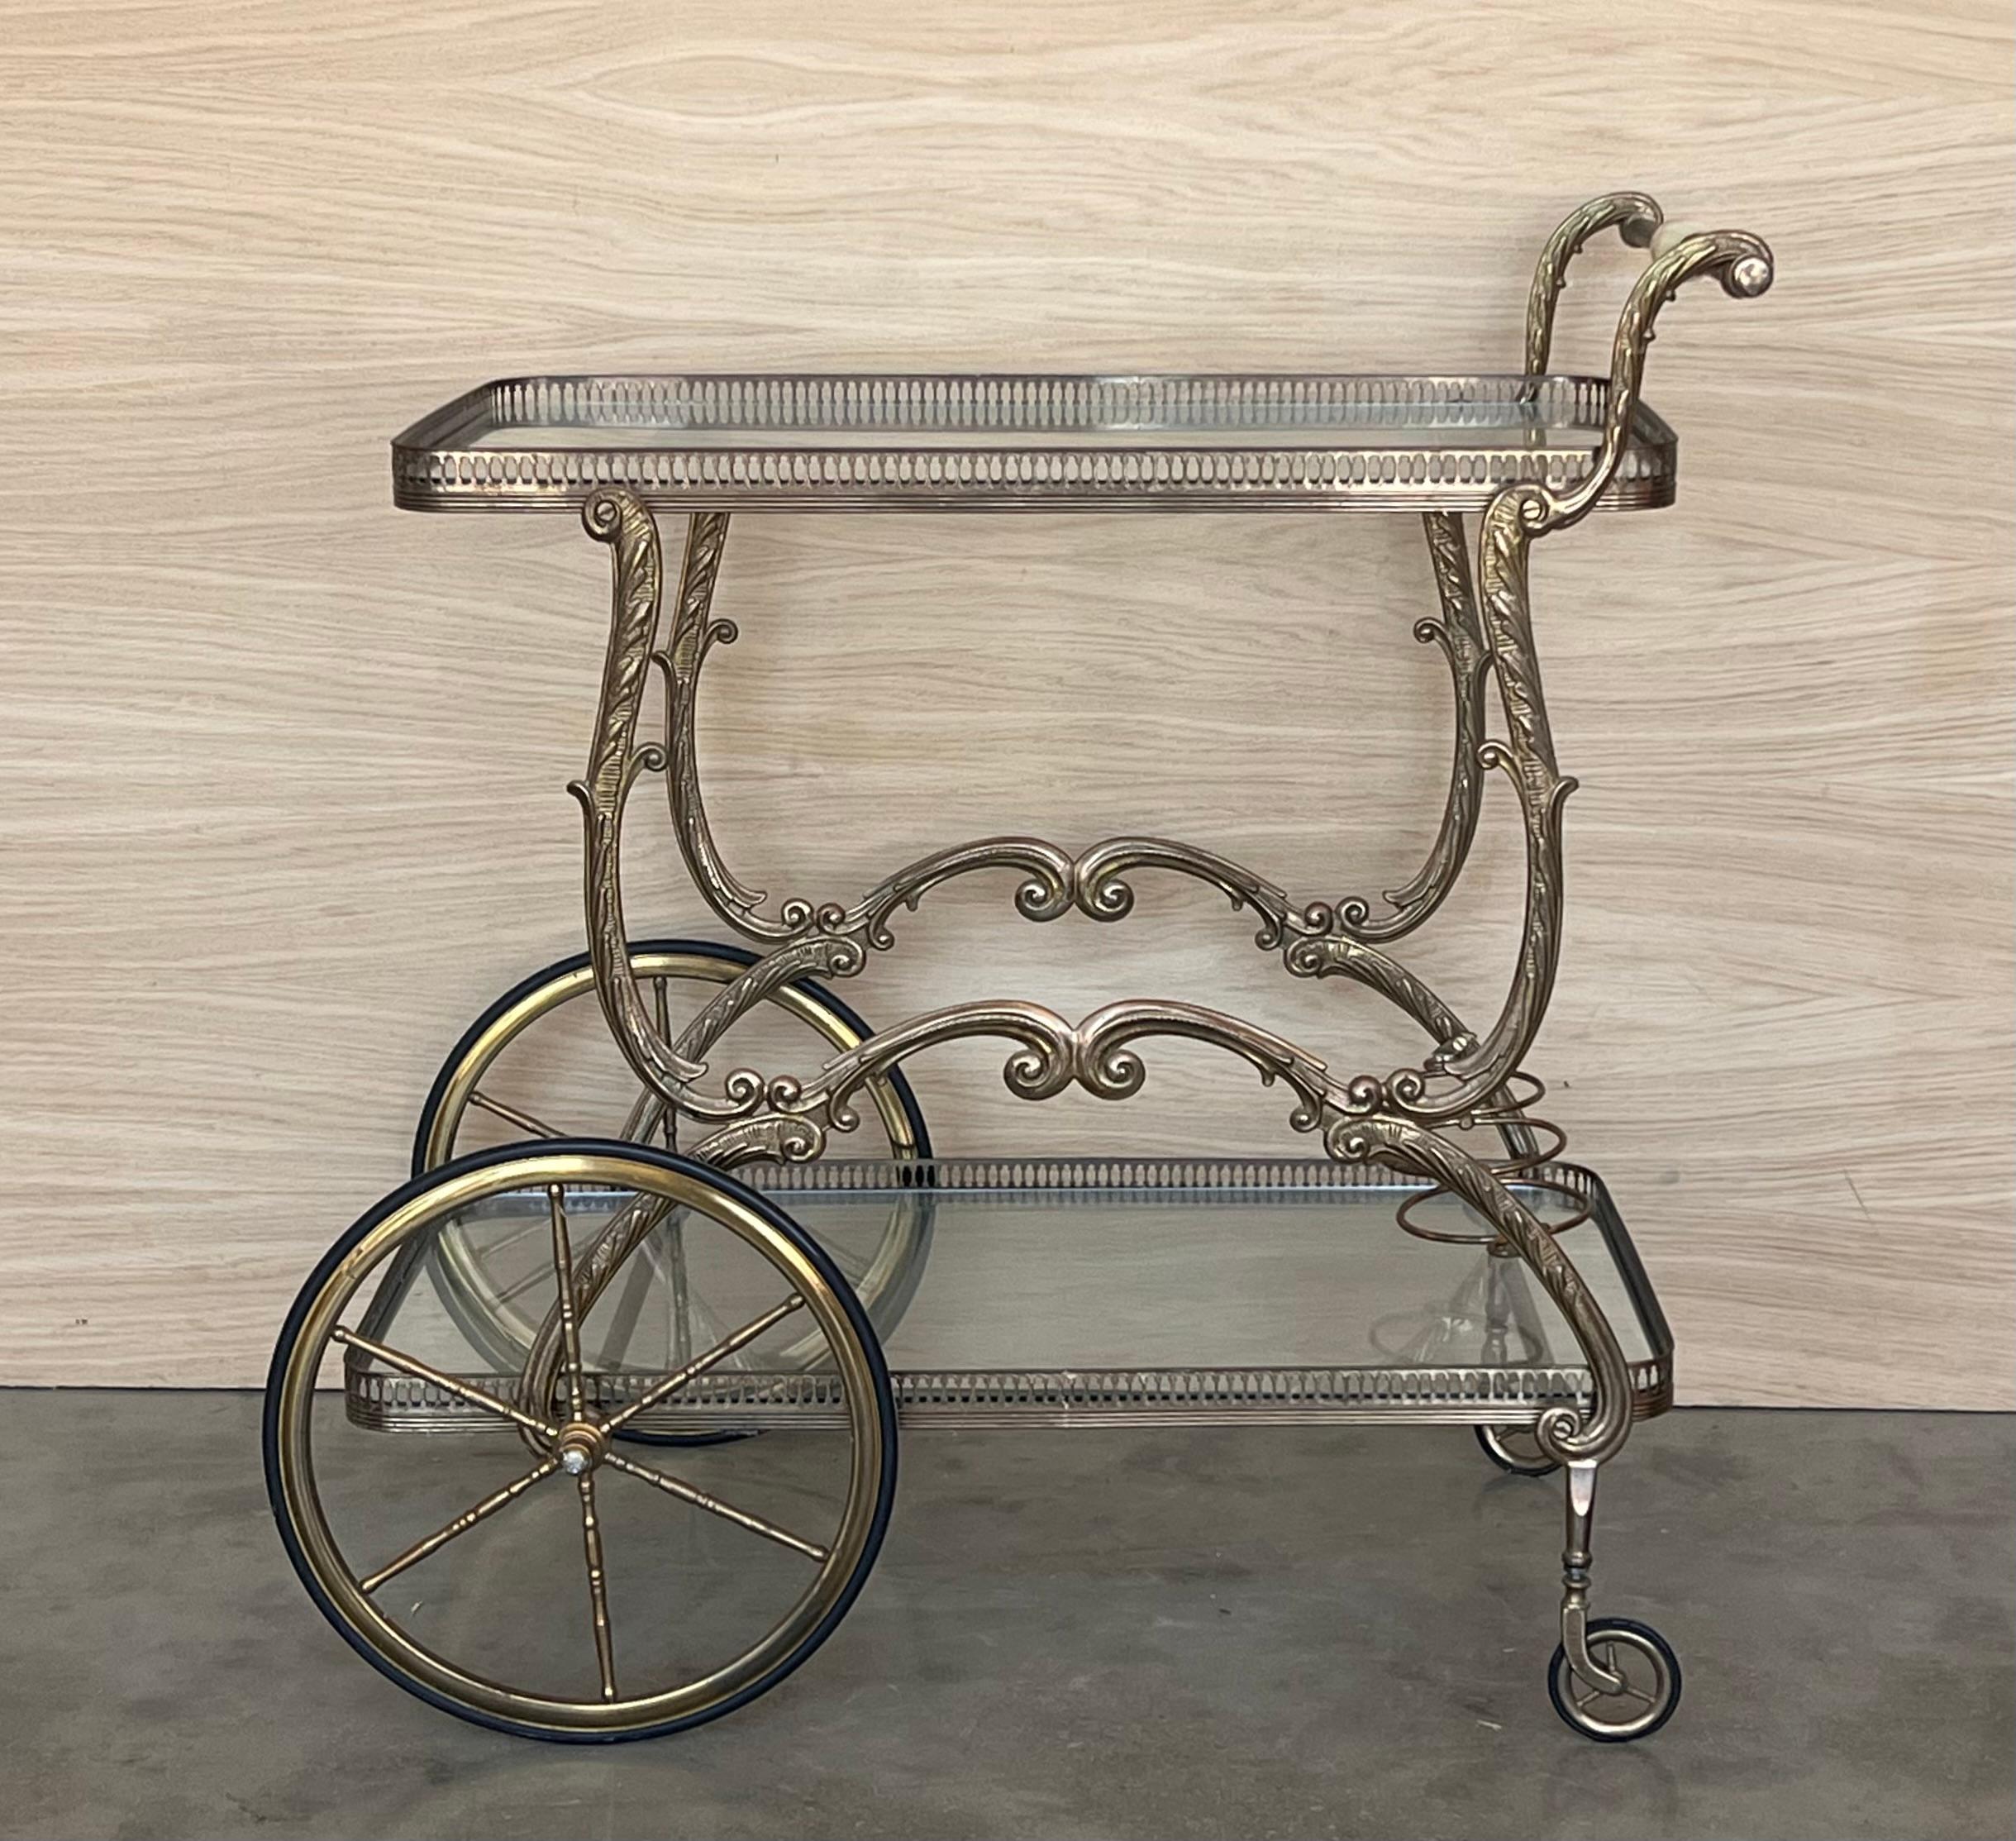 Gorgeous bronze Baroque 2 tier bar or tea cart. under the with wood shelves. Features a heavy ornate bronze frame on casters wheels.

Measure to the low shelve: 6.29in
Measure to the hight shelve: 25.59in